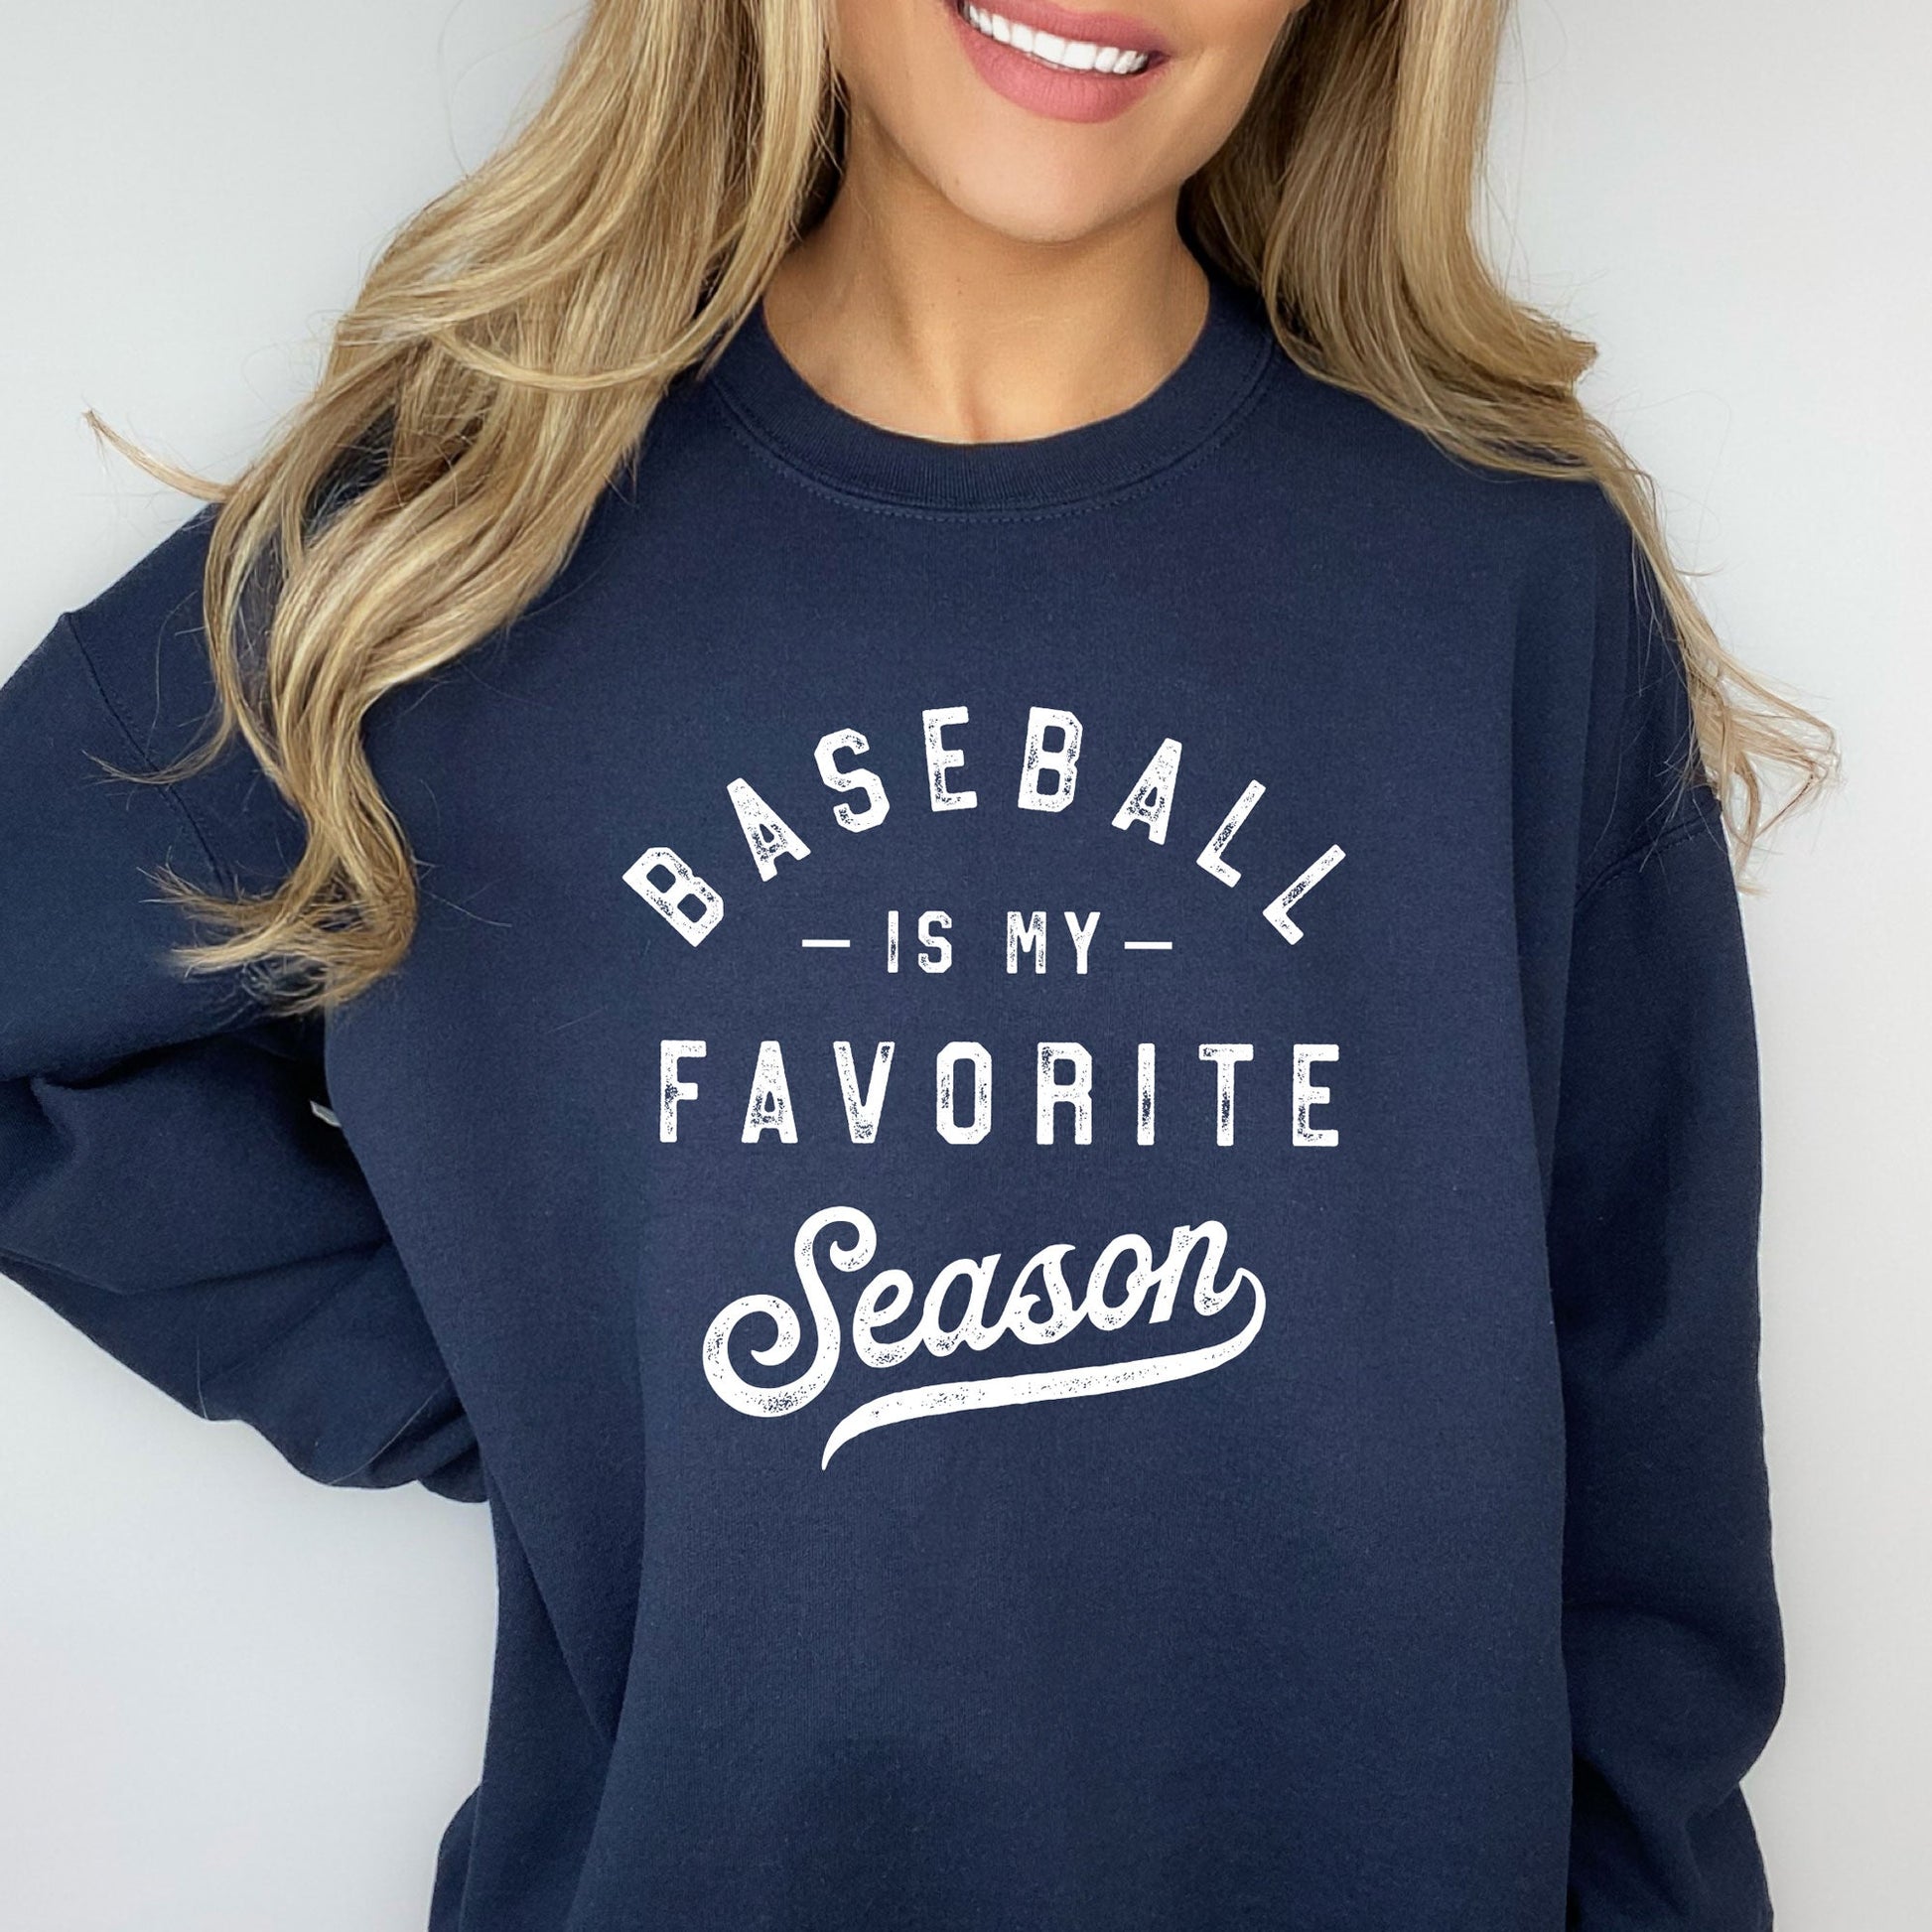 woman wearing a navy sweatshirt with a distressed white ink print reading "baseball is my favorite season"